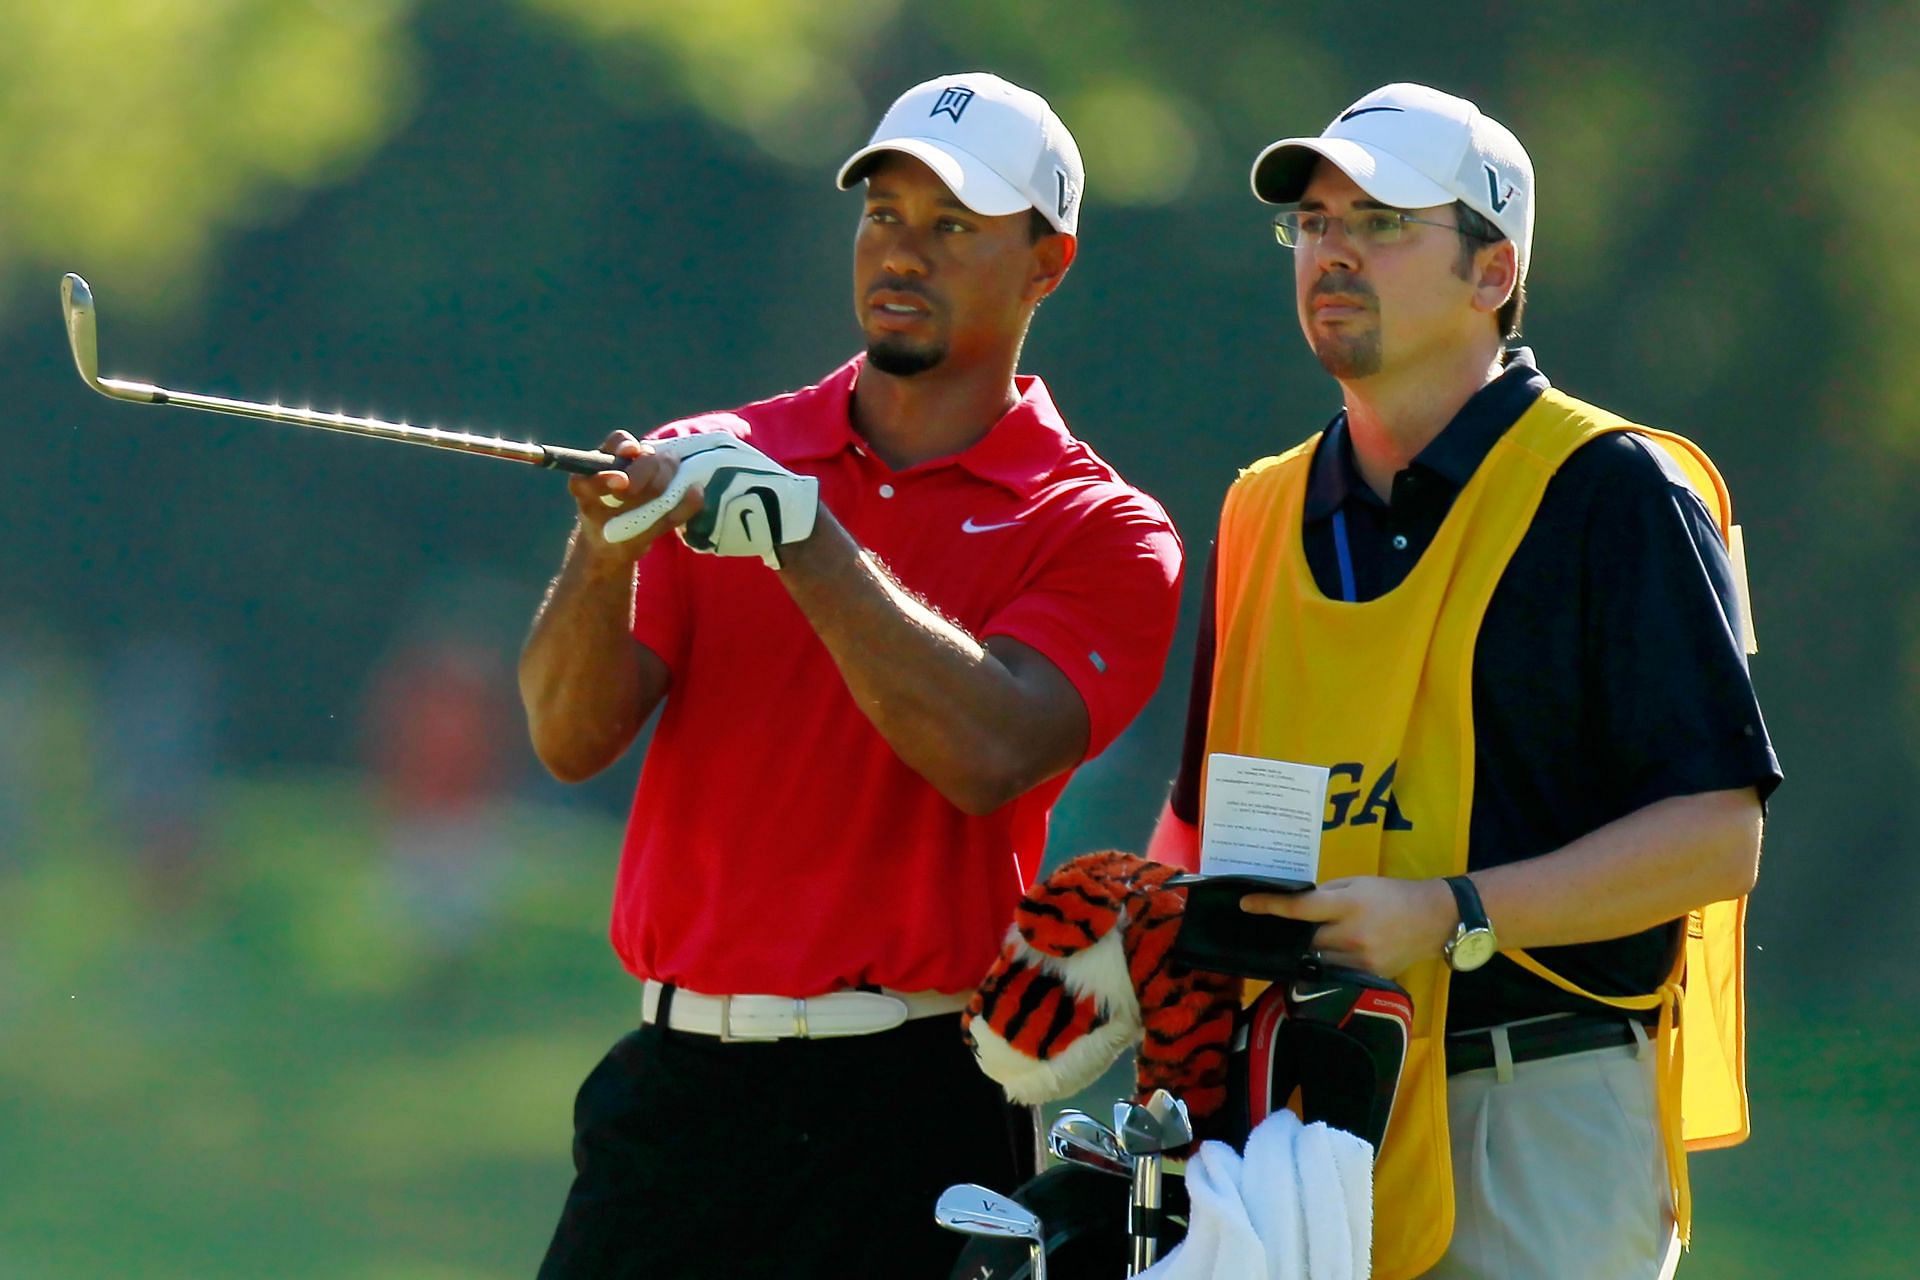 Tiger Woods and caddie Bryon Bell (Image via Kevin C. Cox / Getty Images)